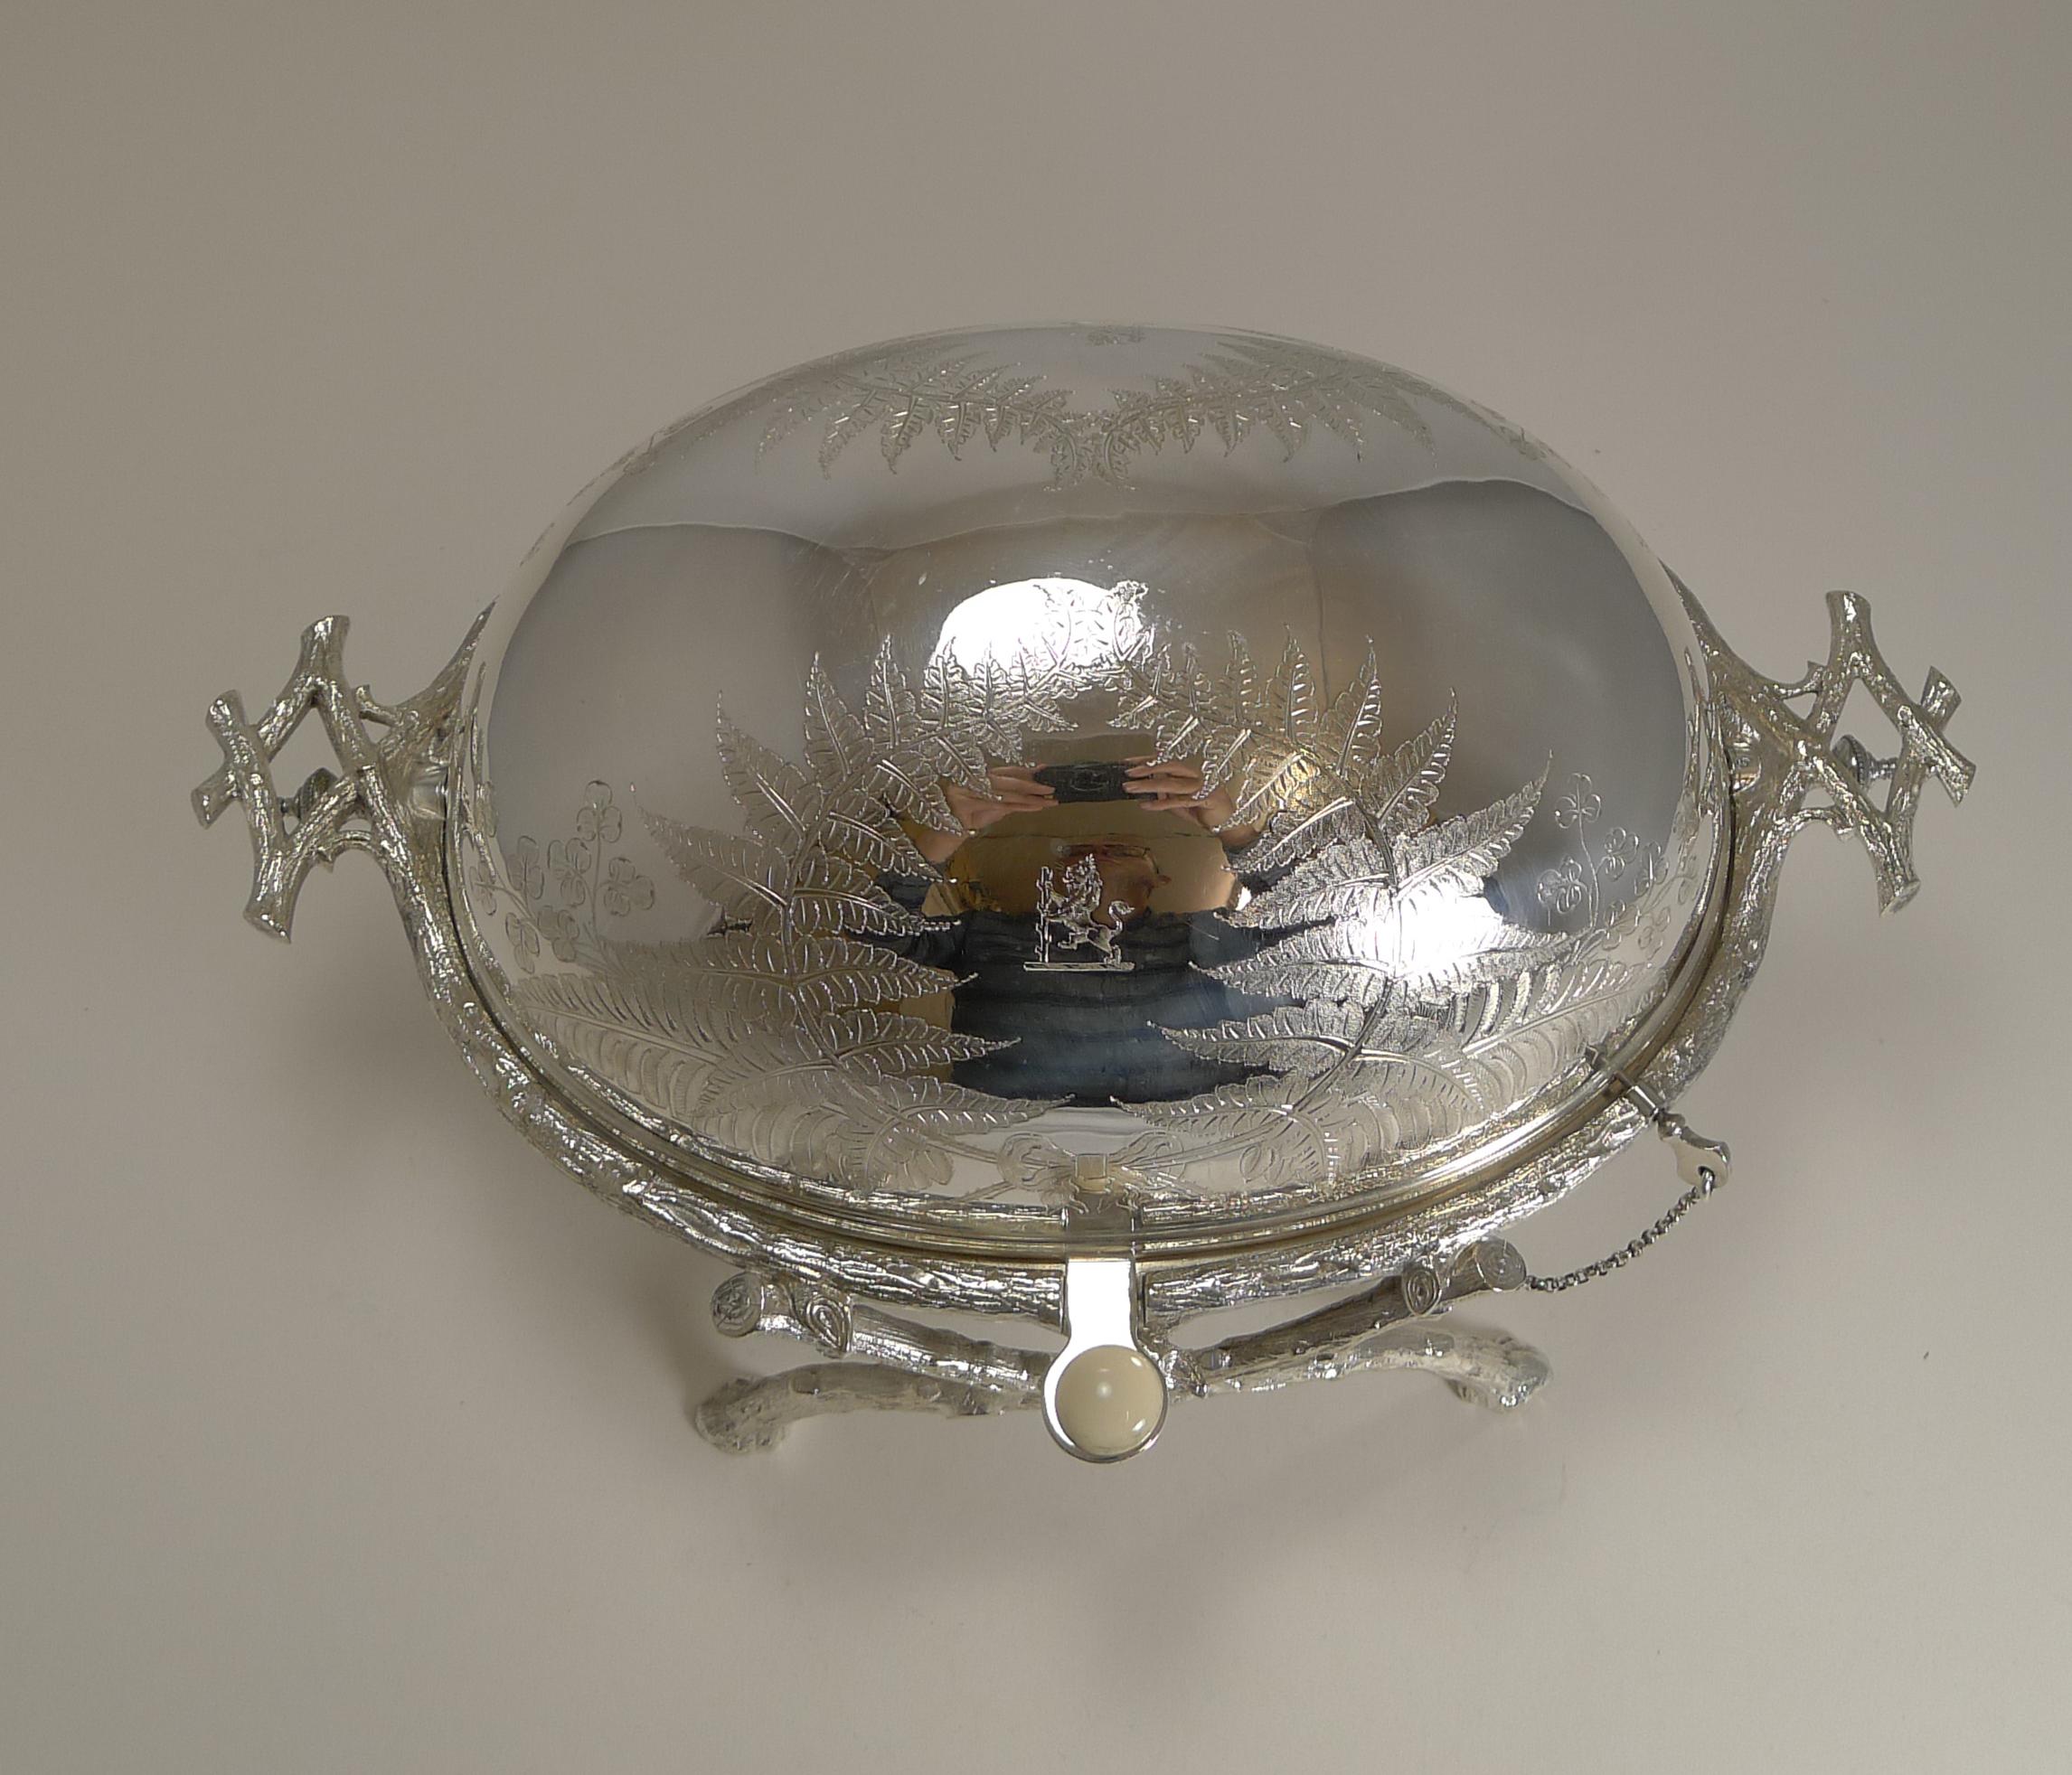 A magnificent Victorian revolving breakfast dish by Furber and Son of Cheltenham.

The frame is beautifully decorated in the form of wooden logs and the domed top lavishly engraved with Ferns tied each side with a ribbon and bow, very Victorian